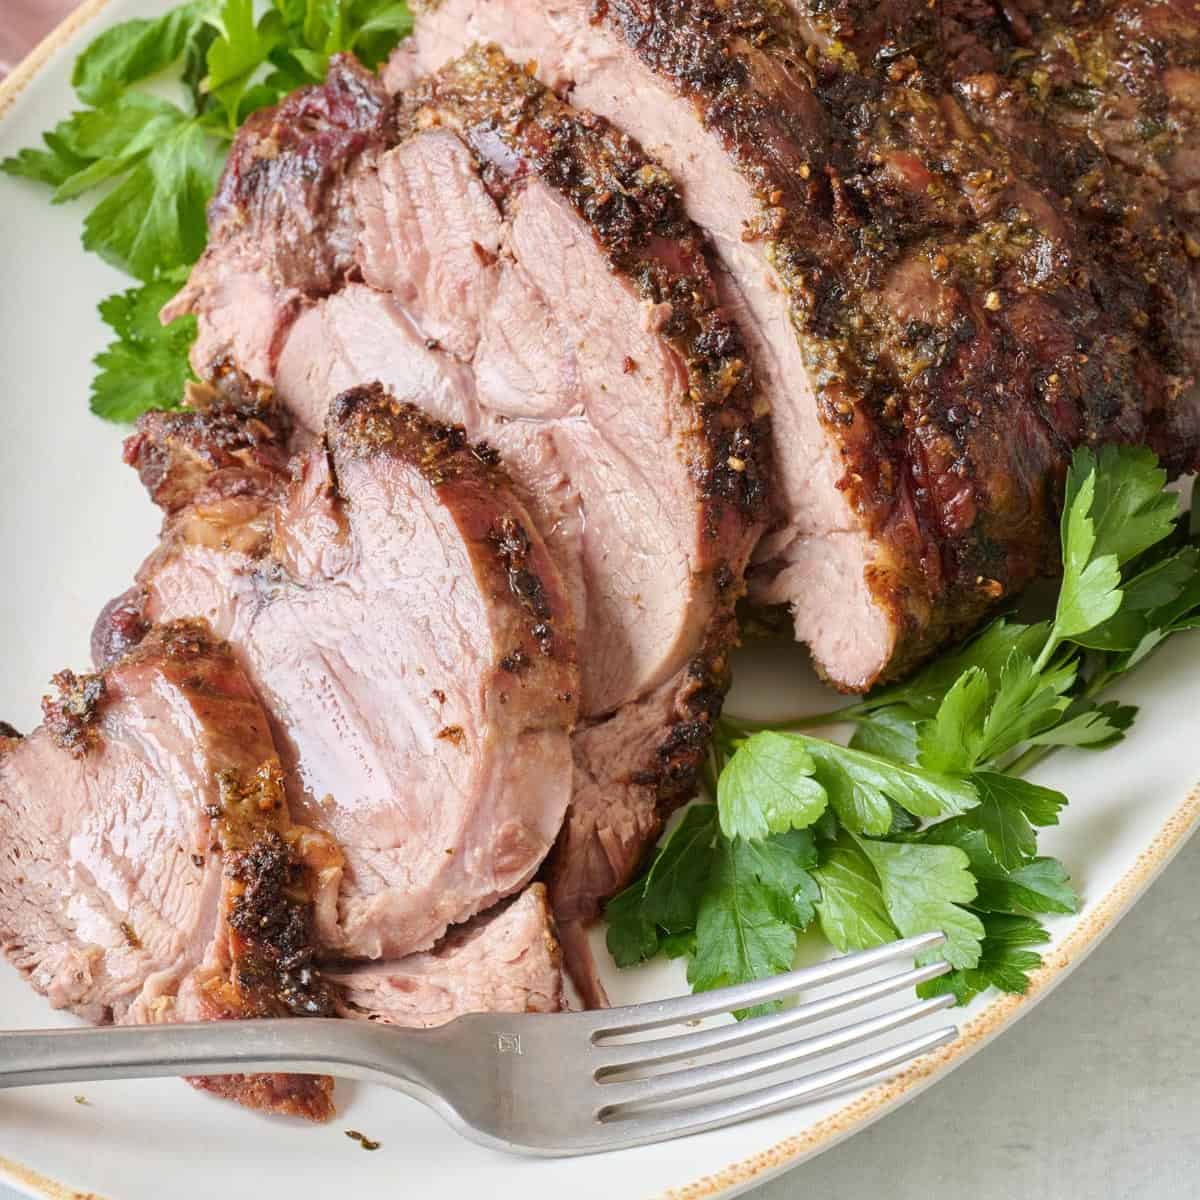 Sliced roasted leg of lamb on a plate with fresh parsley garnish and a fork.